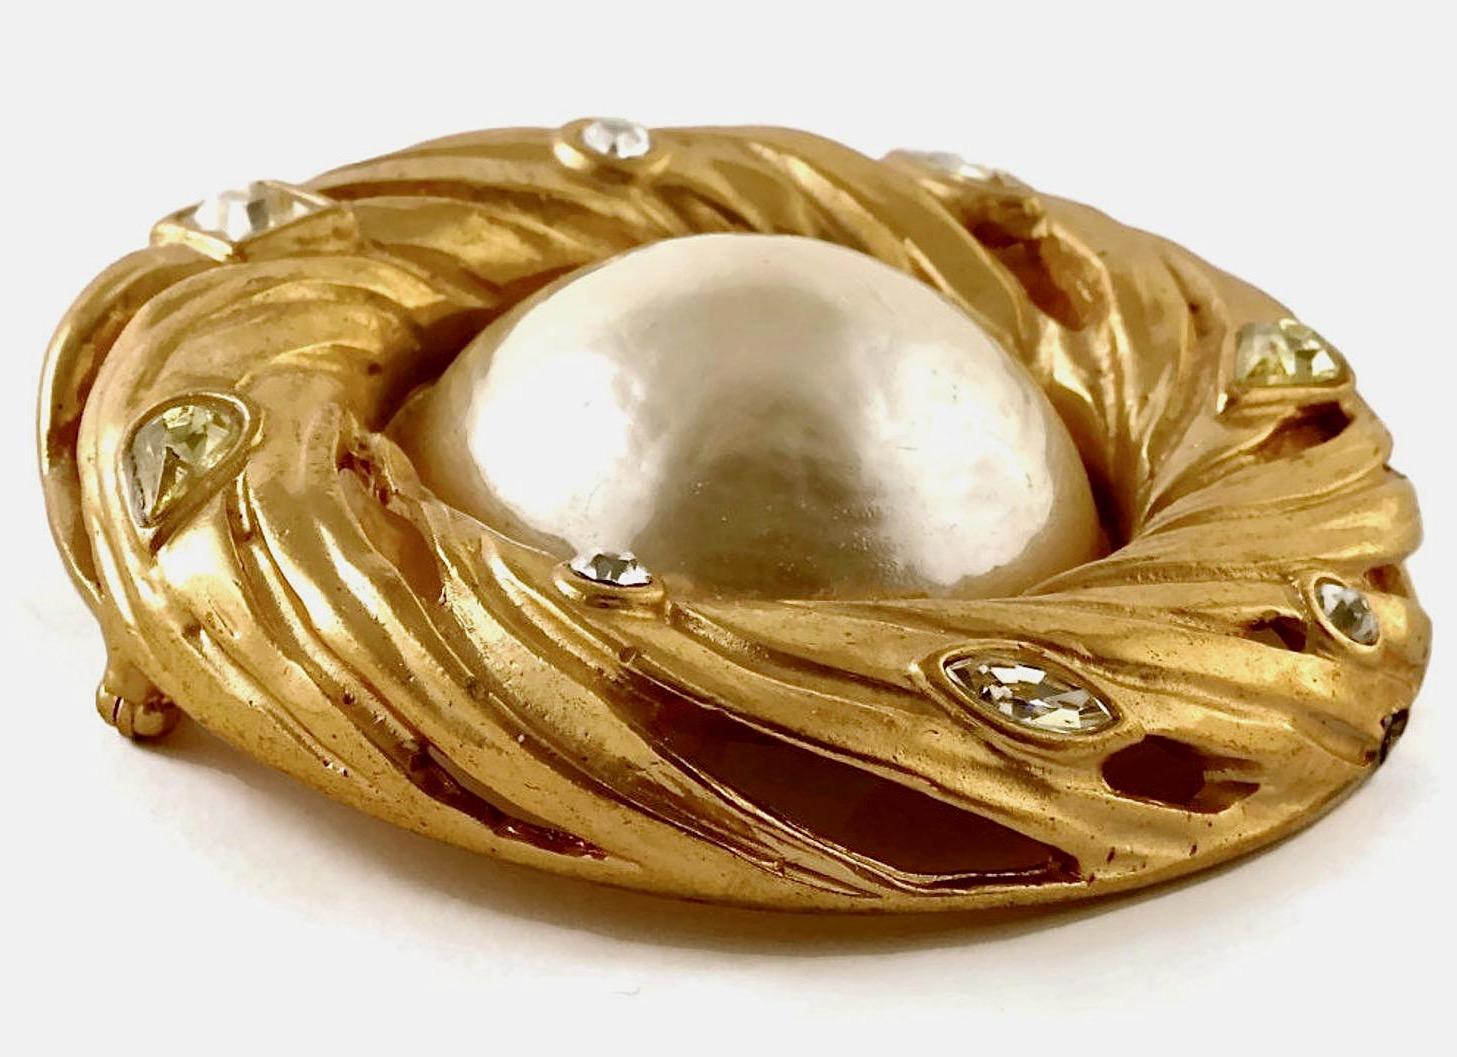 Vintage Massive YSL Yves Saint Laurent Pearl Rhinestone Swirl Pendant Brooch In Excellent Condition For Sale In Kingersheim, Alsace